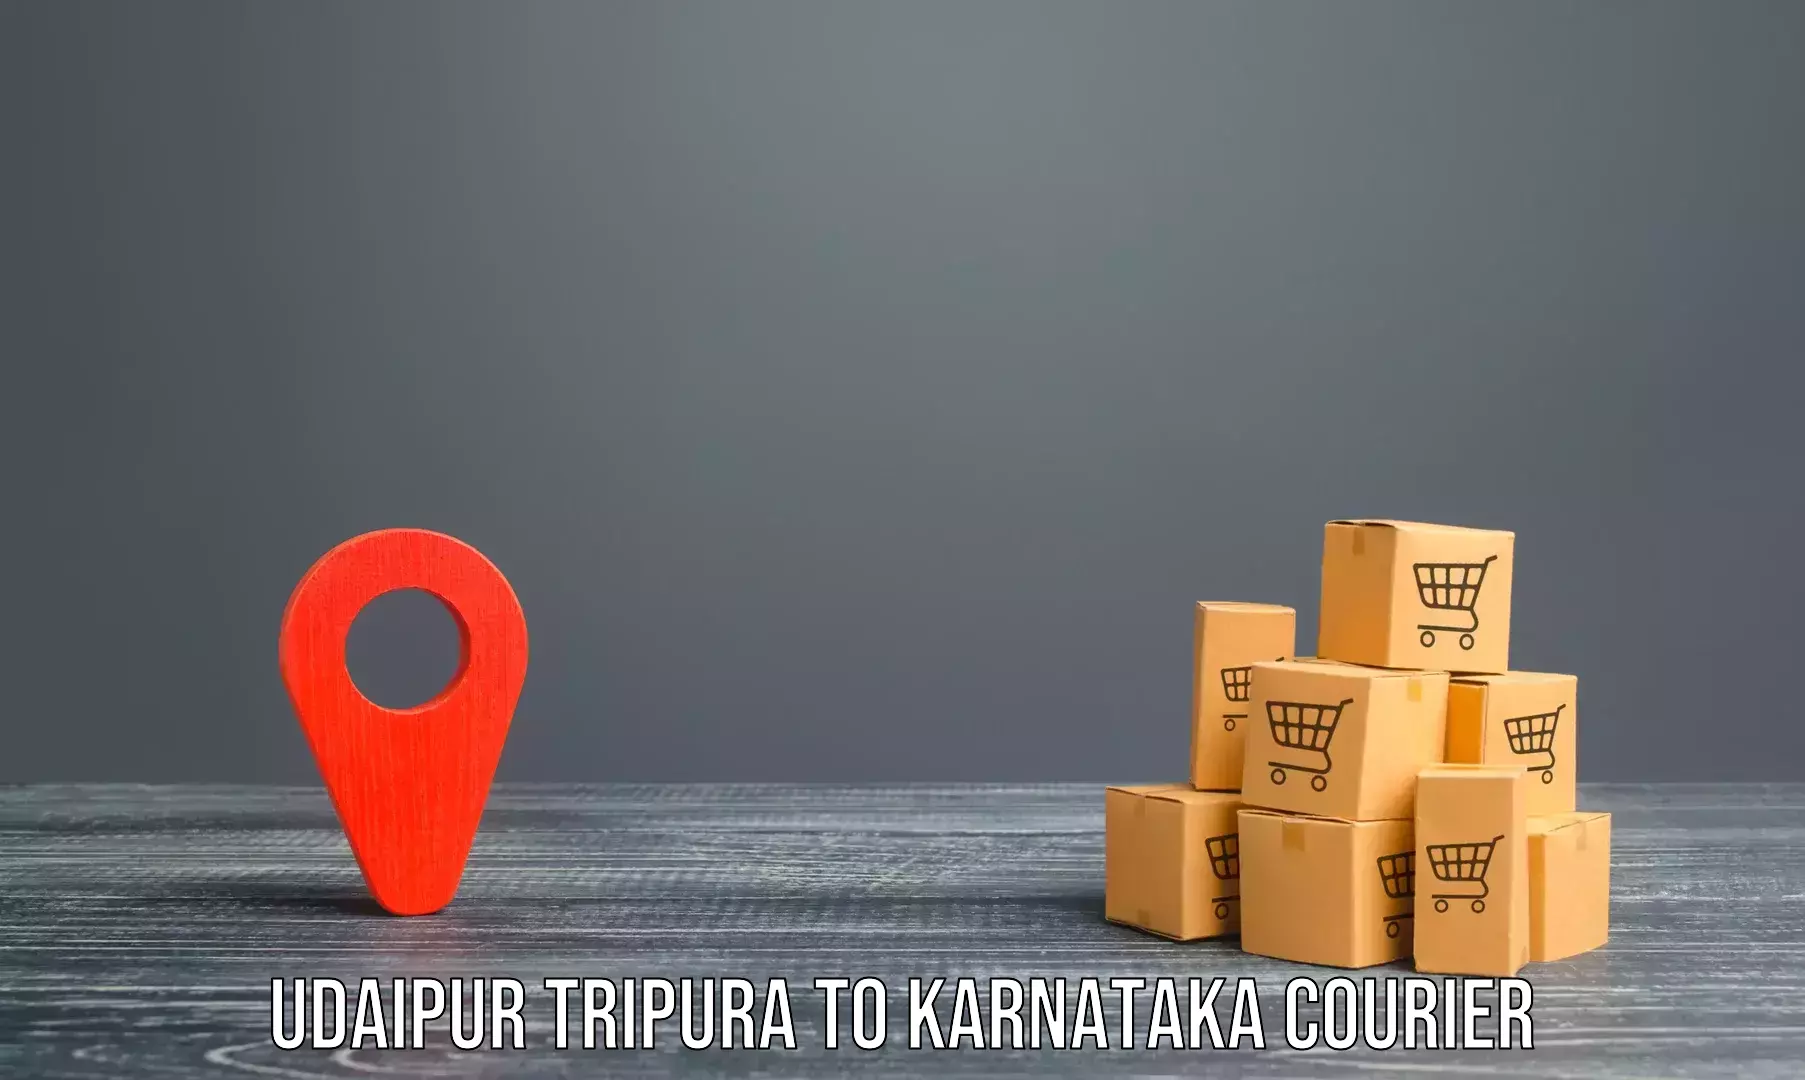 Furniture moving specialists Udaipur Tripura to Bellary